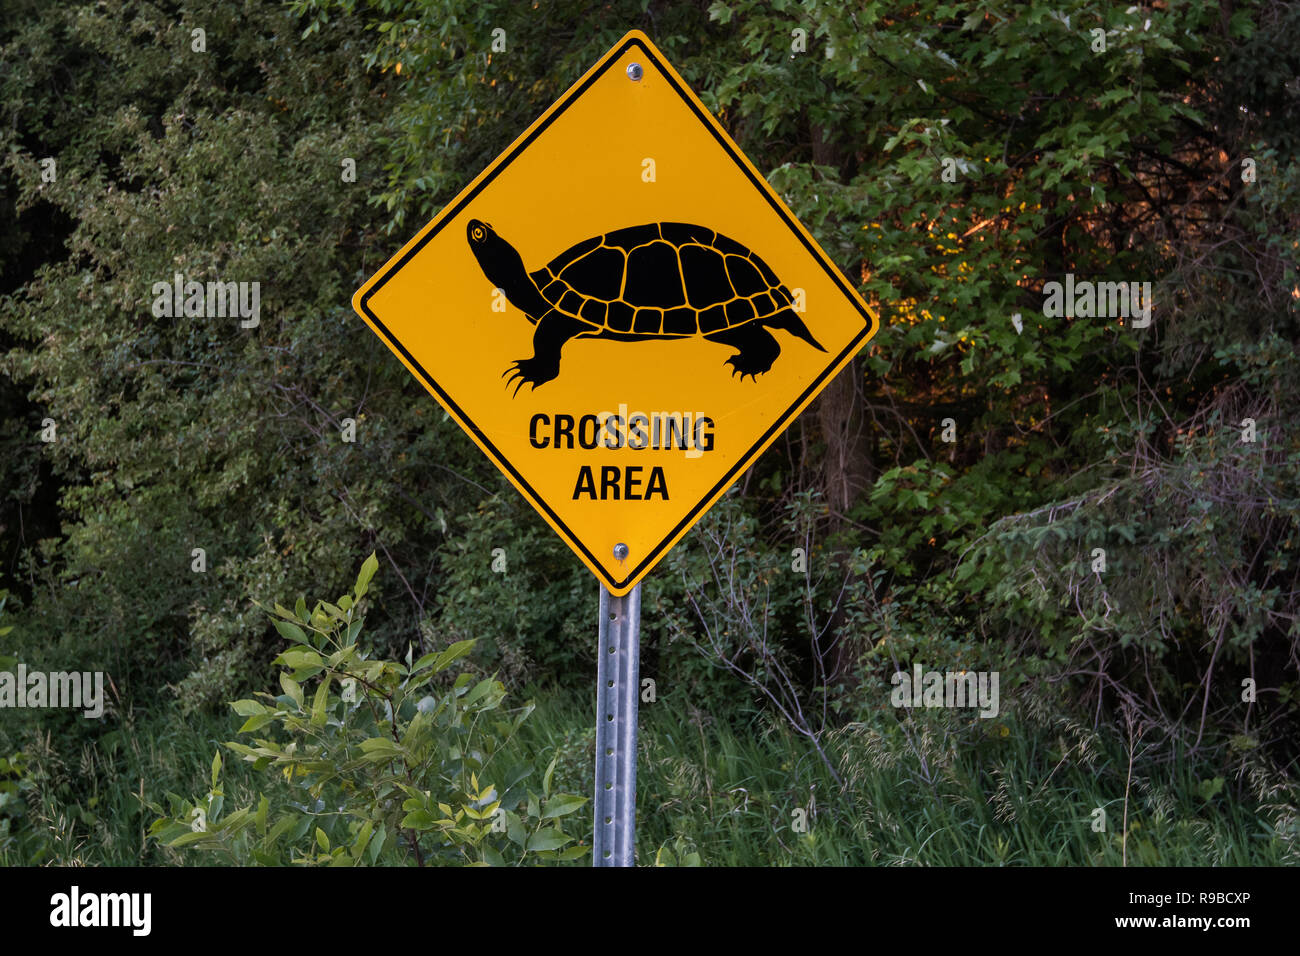 Turtle crossing sign on rural road Banque D'Images